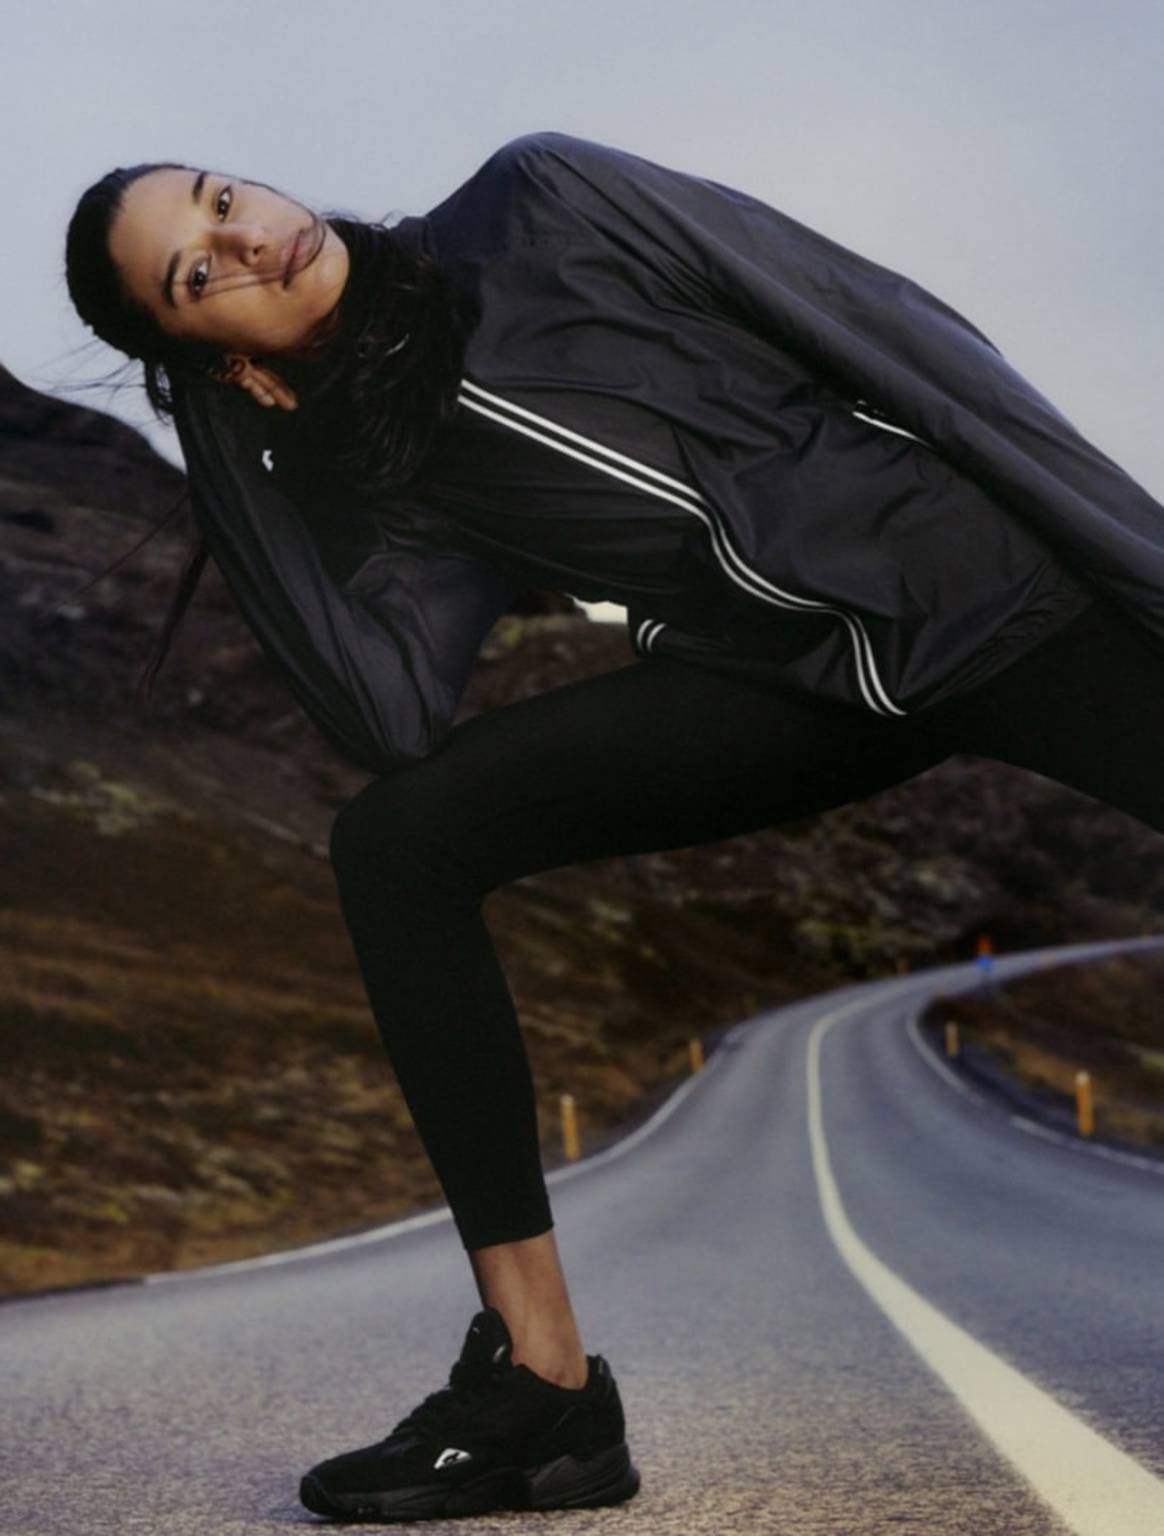 In pictures: Arket’s first sportswear collection